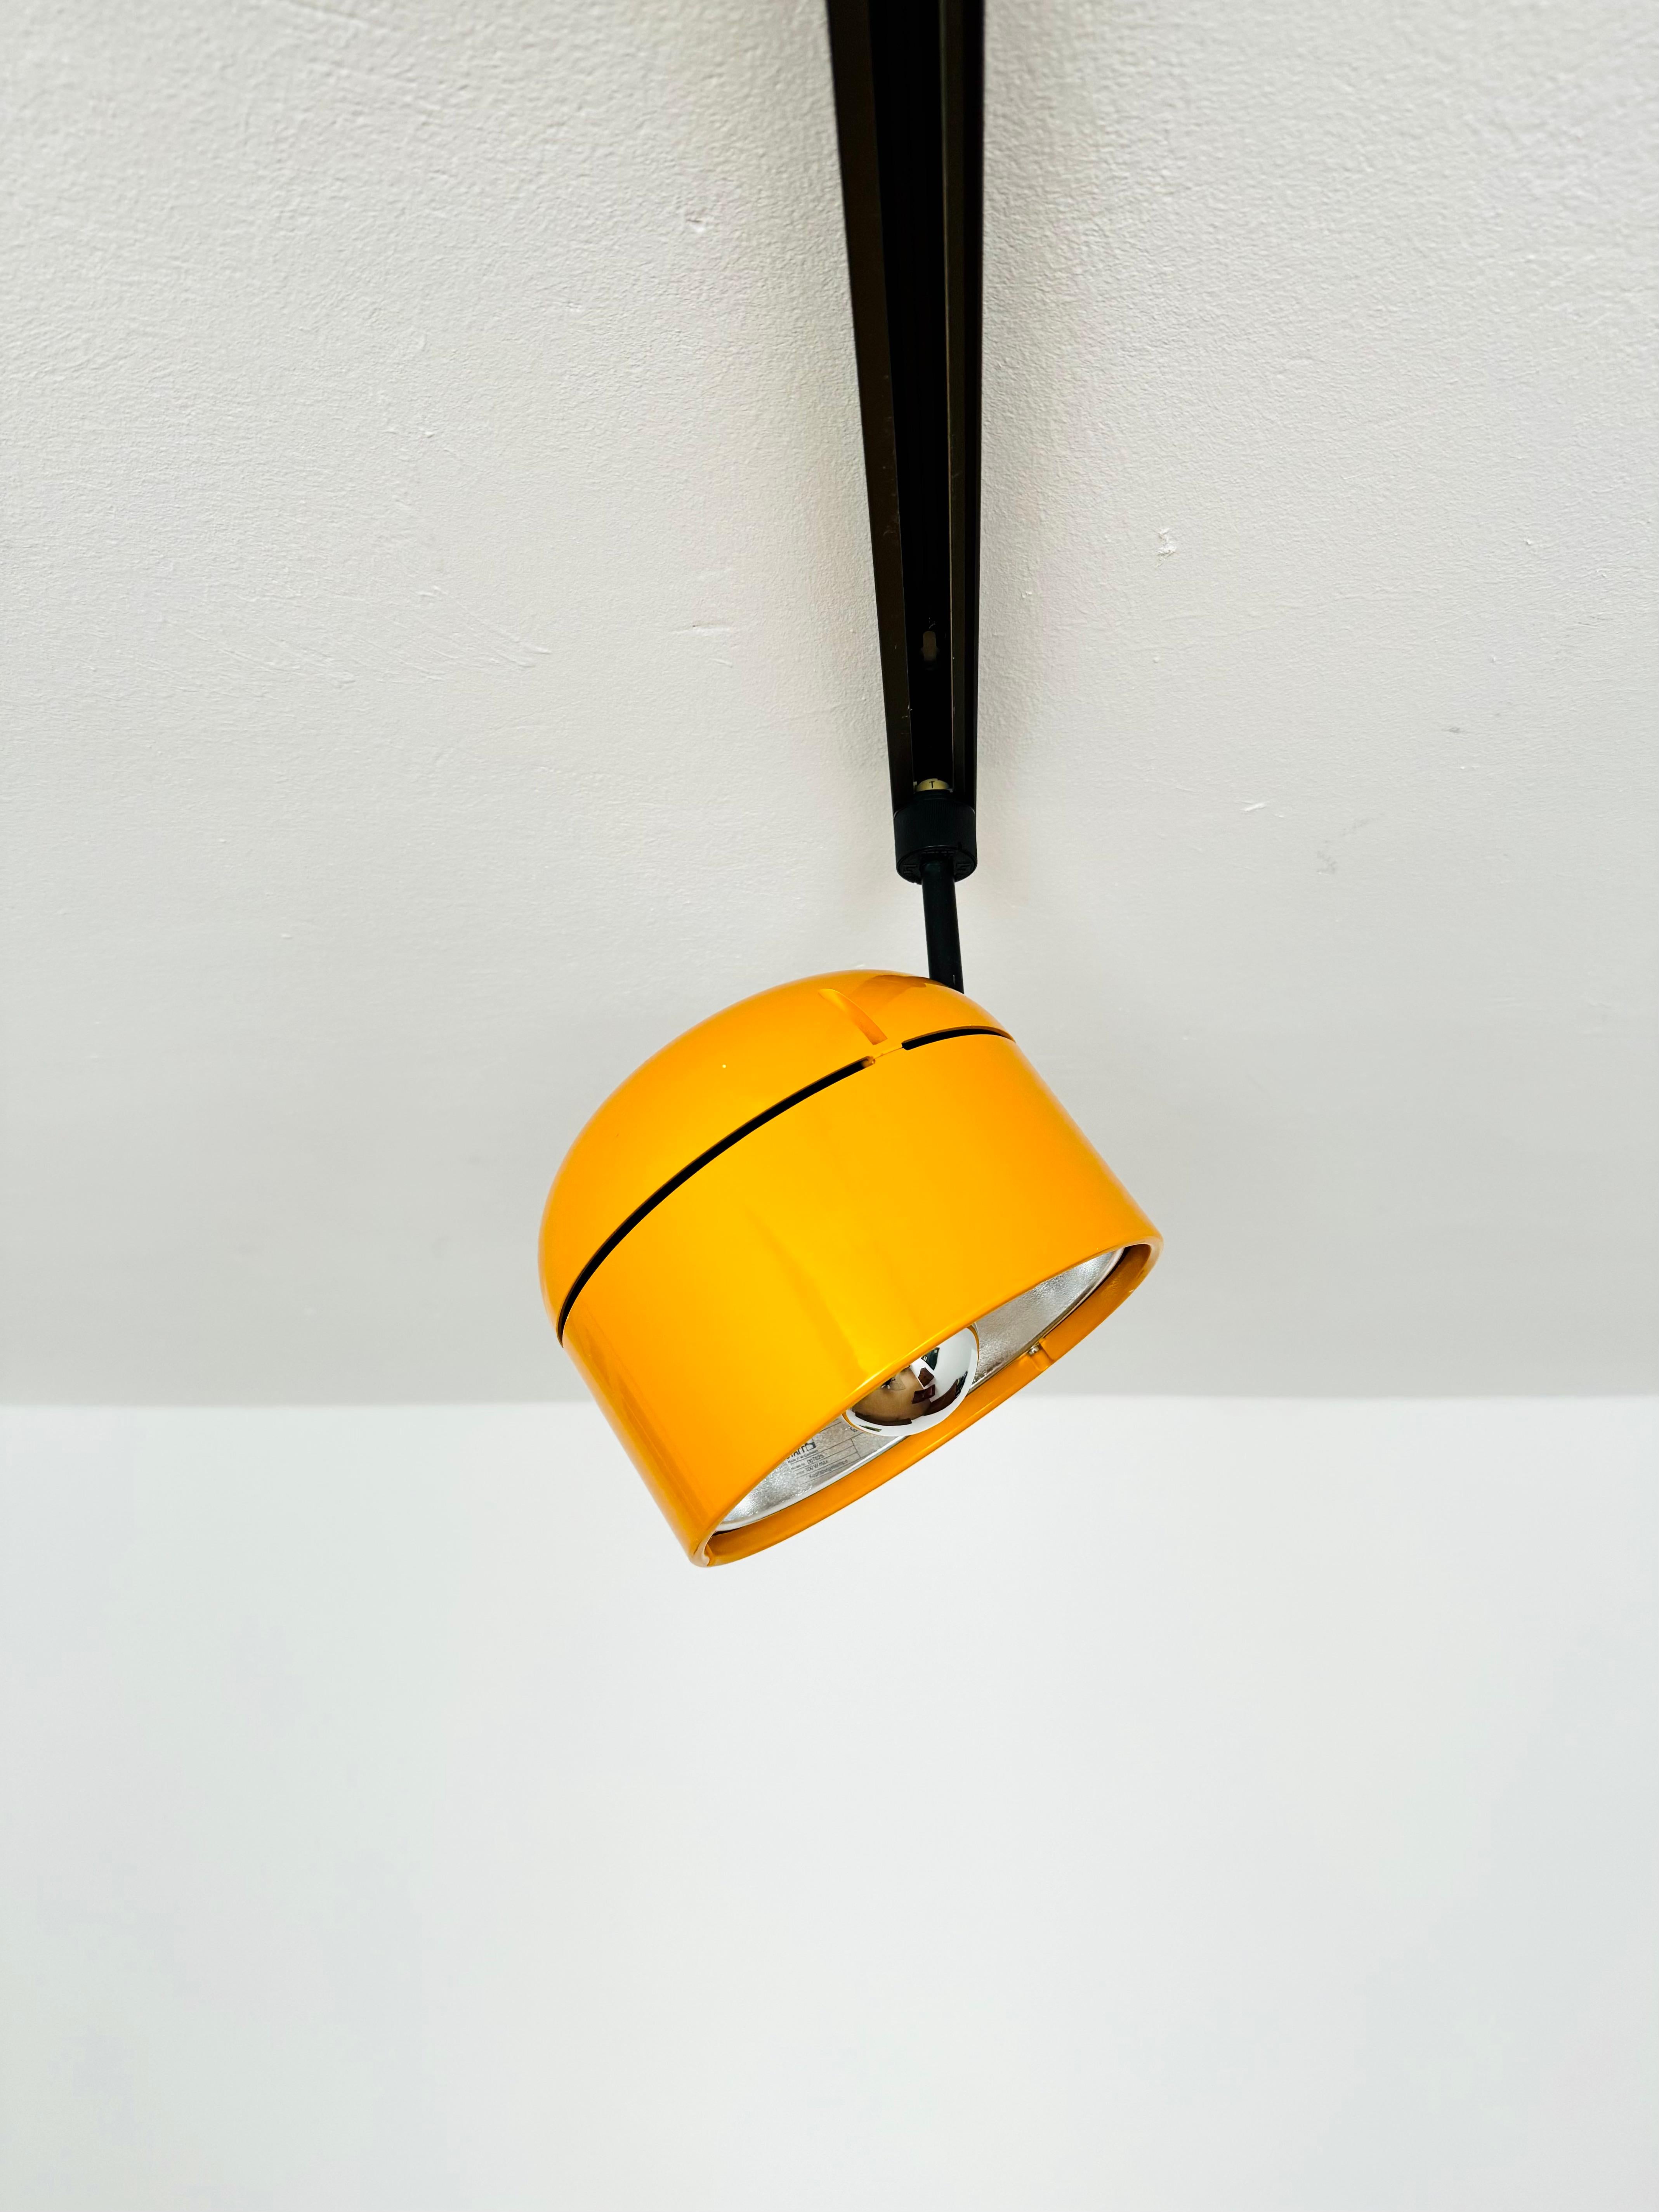 Fantastic 3-phase track lamp from Staff from the 1970s.
The Staff brand is known for its high-quality workmanship and perfectionist design.
The large yellow-orange lamp head is infinitely adjustable.
The mirror reflector creates a focused light so